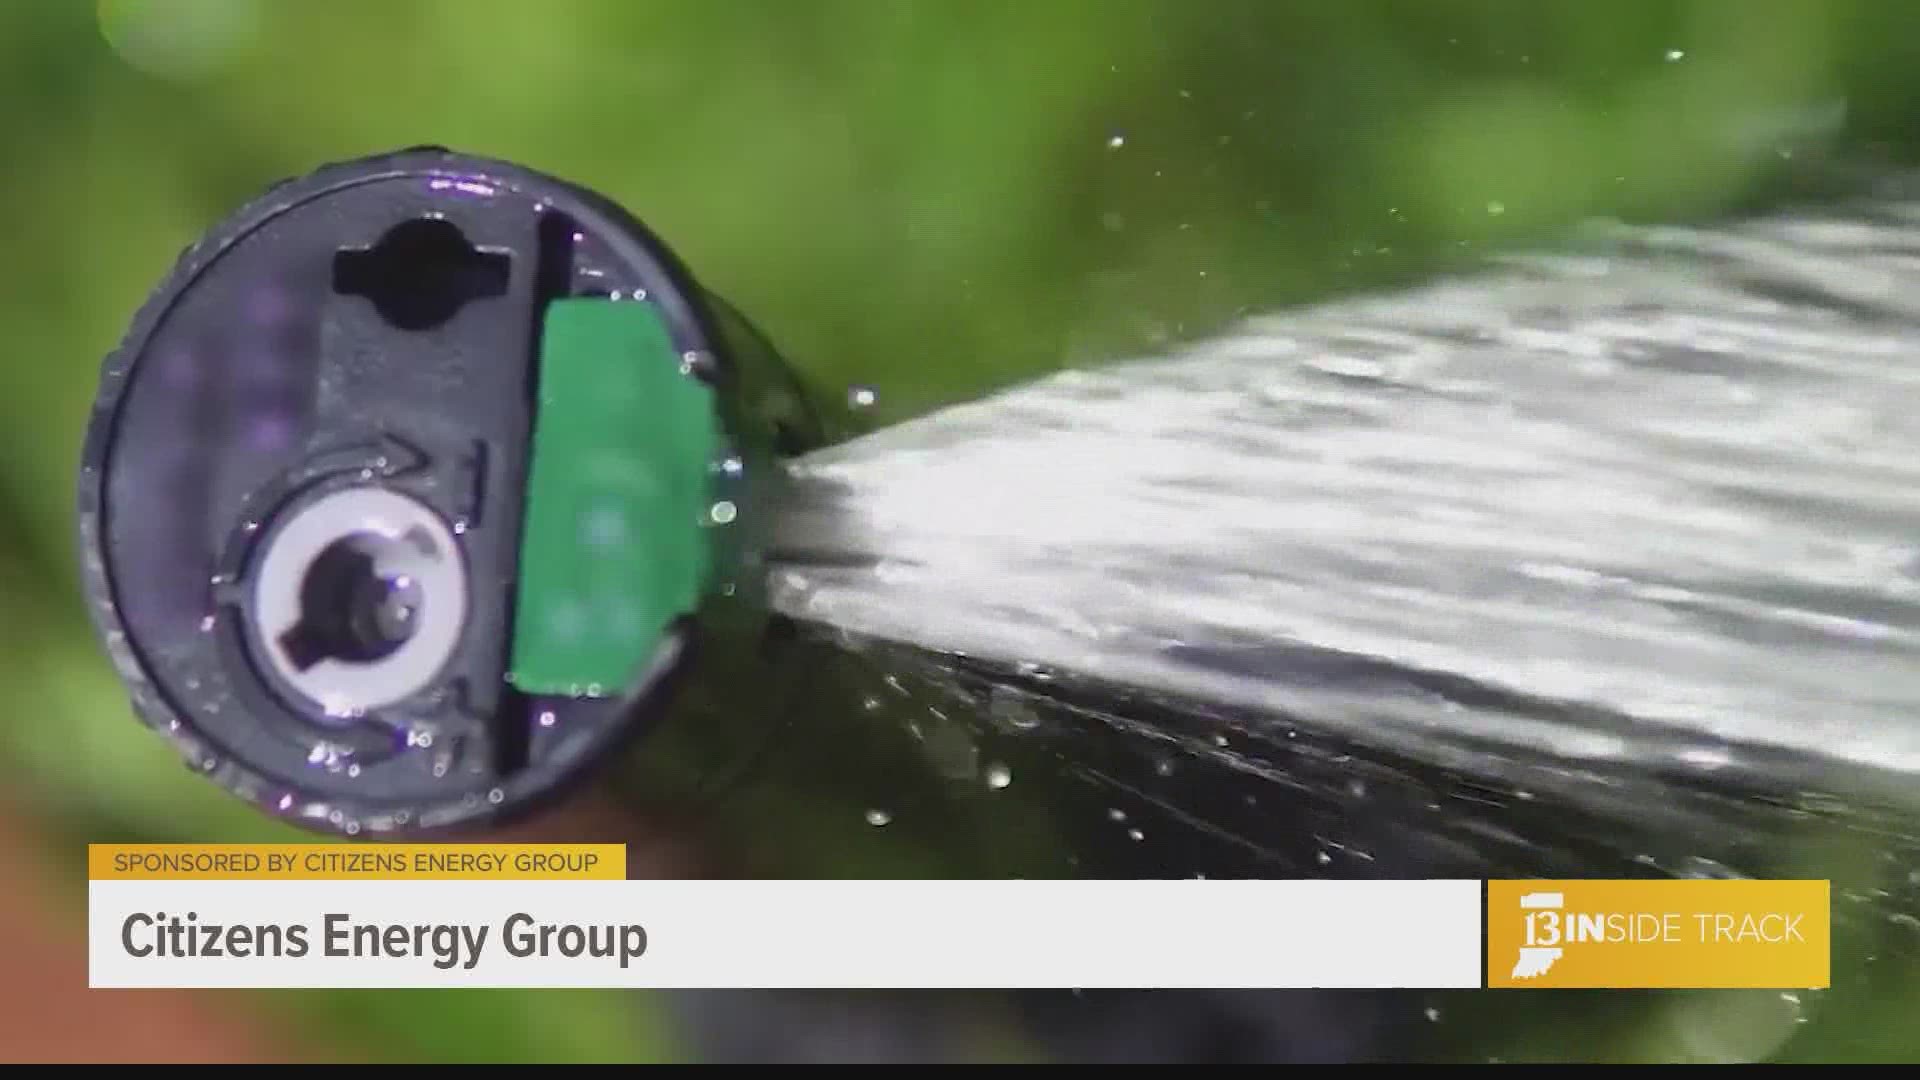 Citizens Energy Group shares some lips to conserve water and how to make your irrigation more efficient.